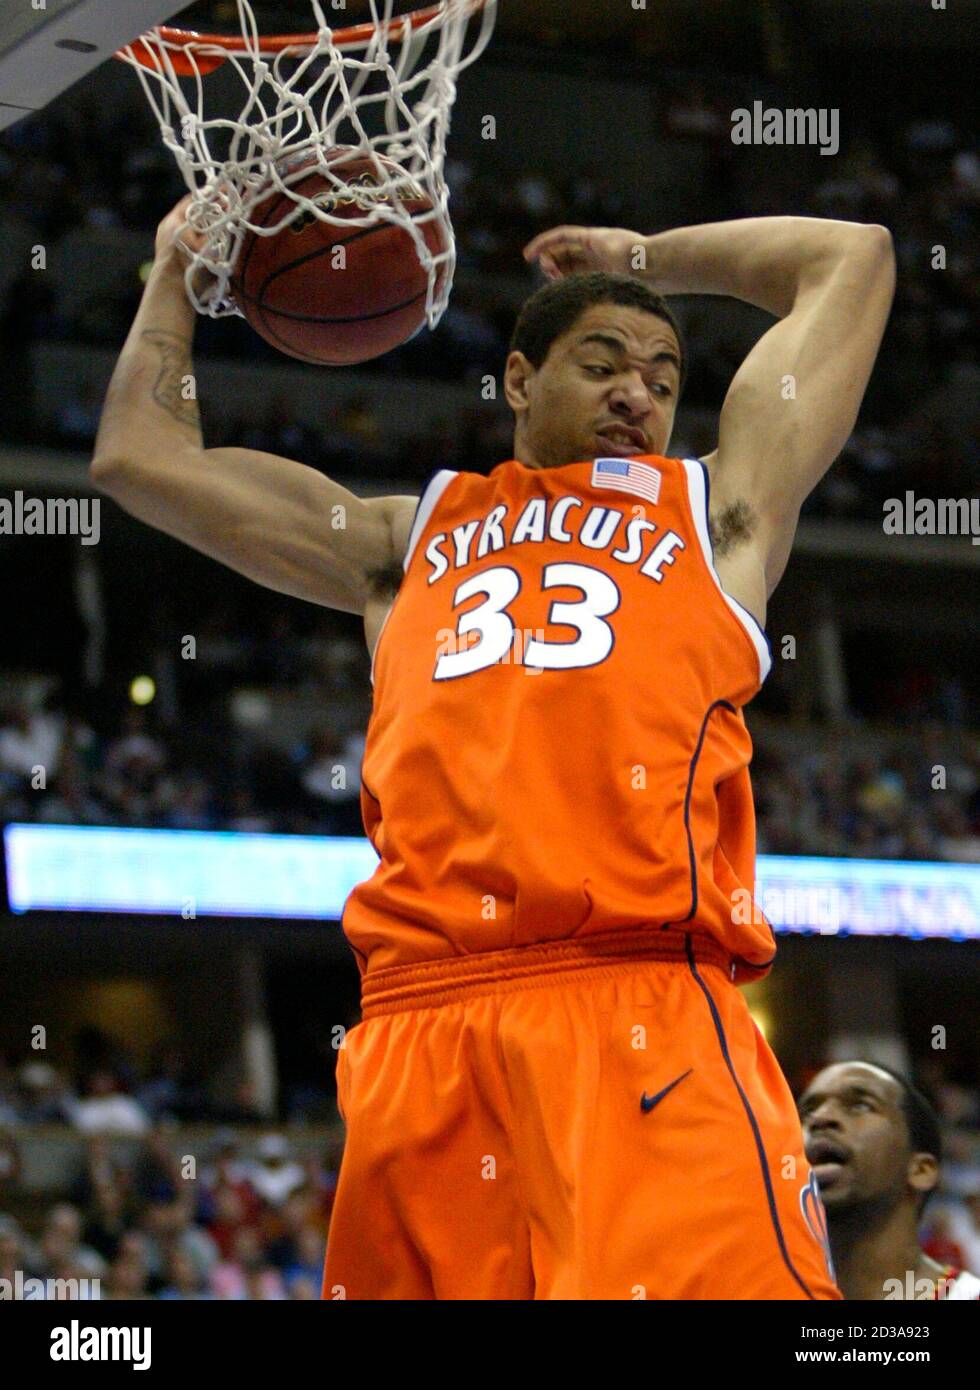 Syracuse Orangemen forward Terrence Roberts stuffs a basket in the second  half against the Maryland Terrapins in the NCAA Division 1 men's basketball  championship second round game in Denver, March 20, 2004.